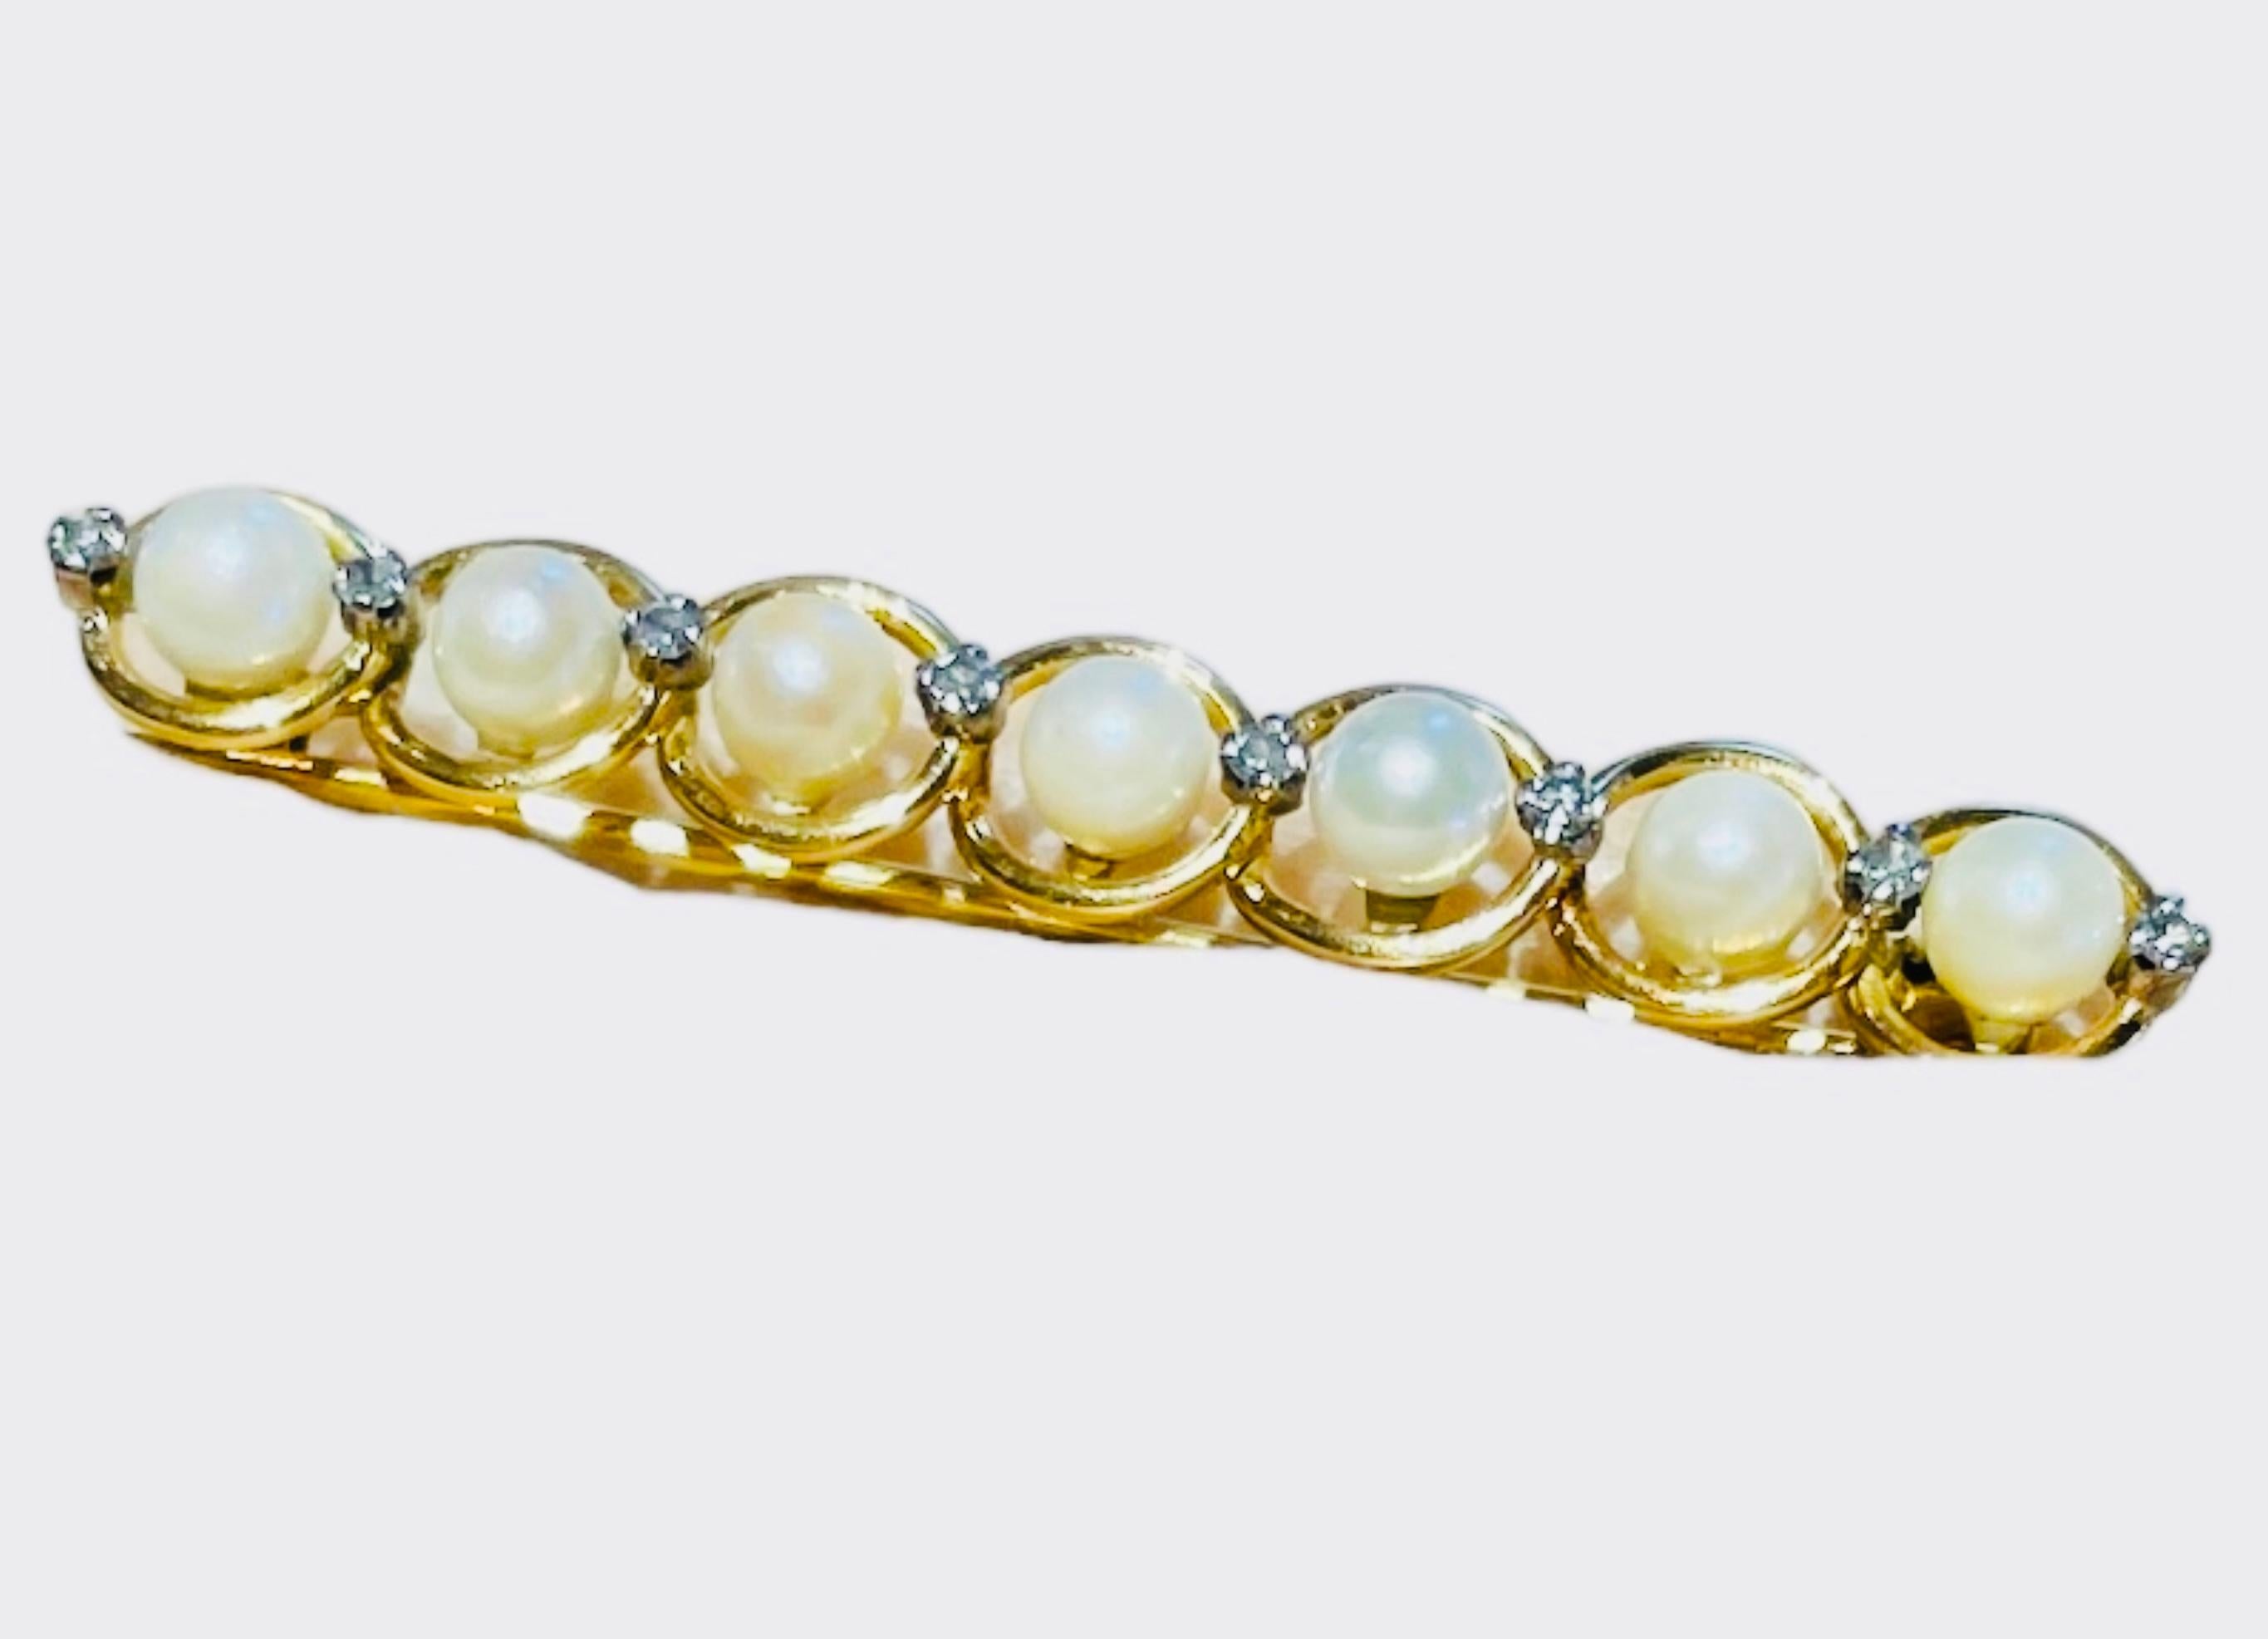 14k Yellow Gold Diamonds and Pearls Bar Brooch In Good Condition For Sale In Guaynabo, PR